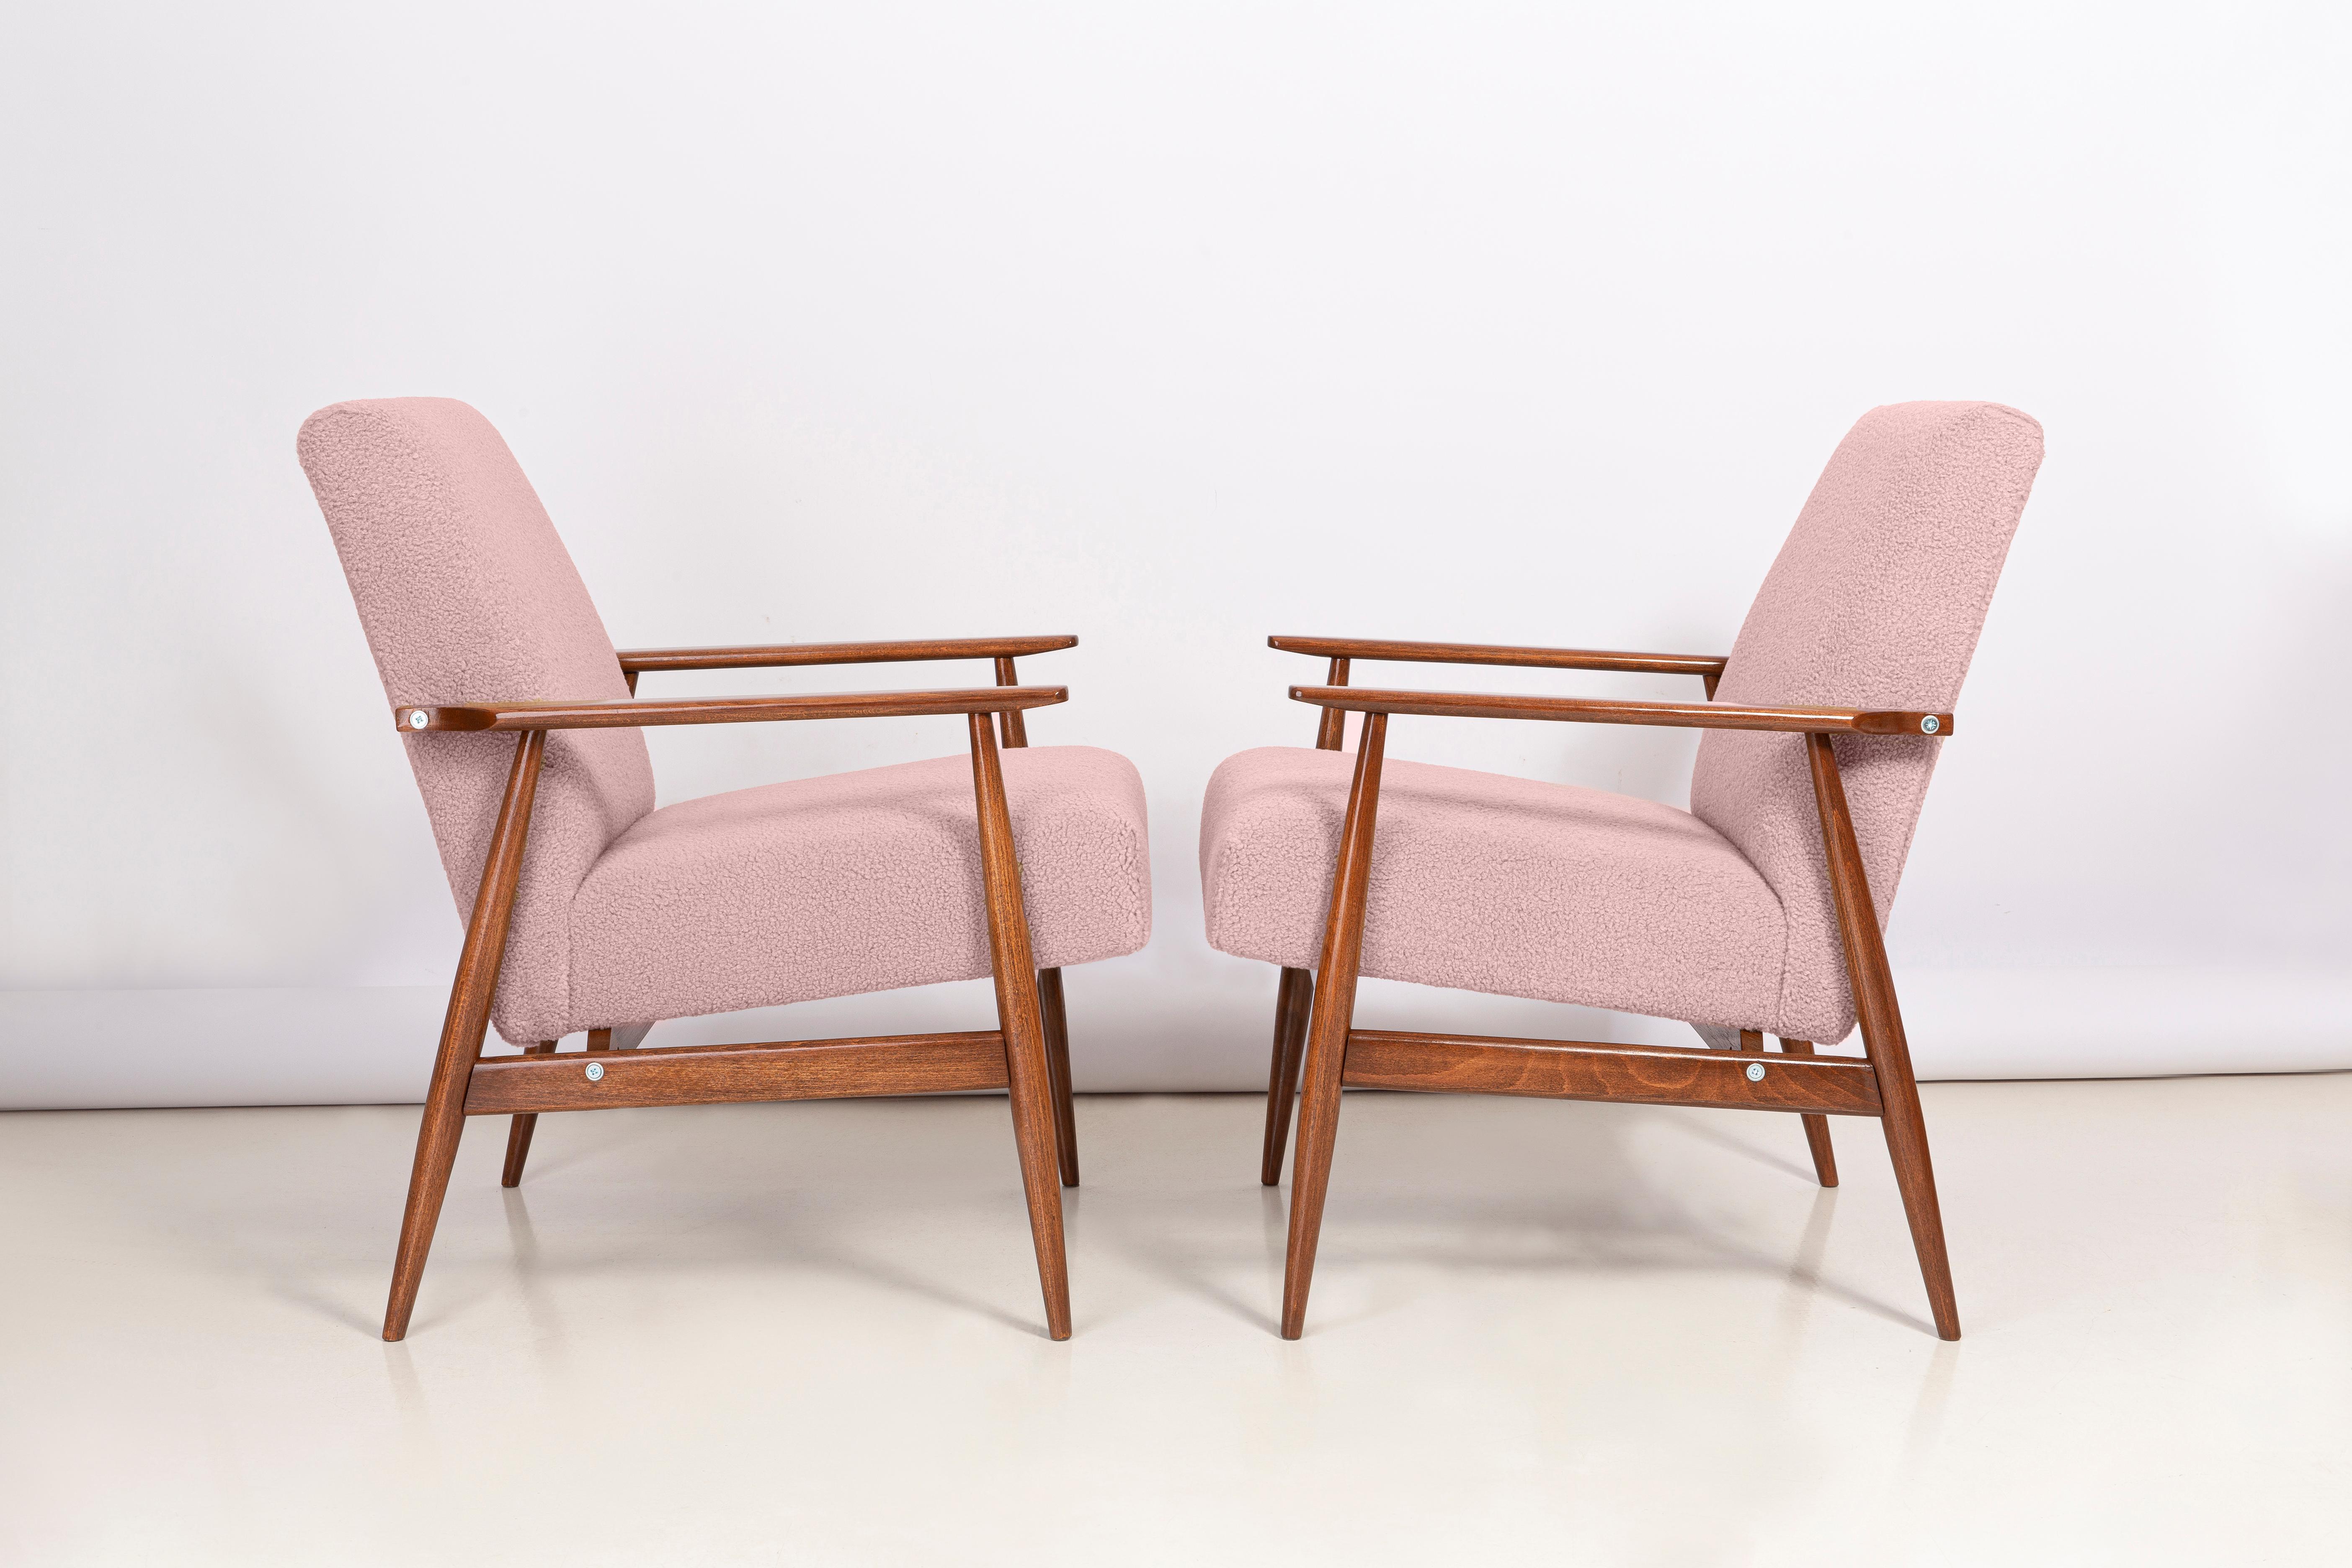 Dusty pink bouclé armchairs, designed by Henryk Lis. Furniture after full carpentry and upholstery renovation. The armchair will be perfect in Minimalist spaces, both private and public. 

Upholstery in faux fur has a structure reminiscent of a